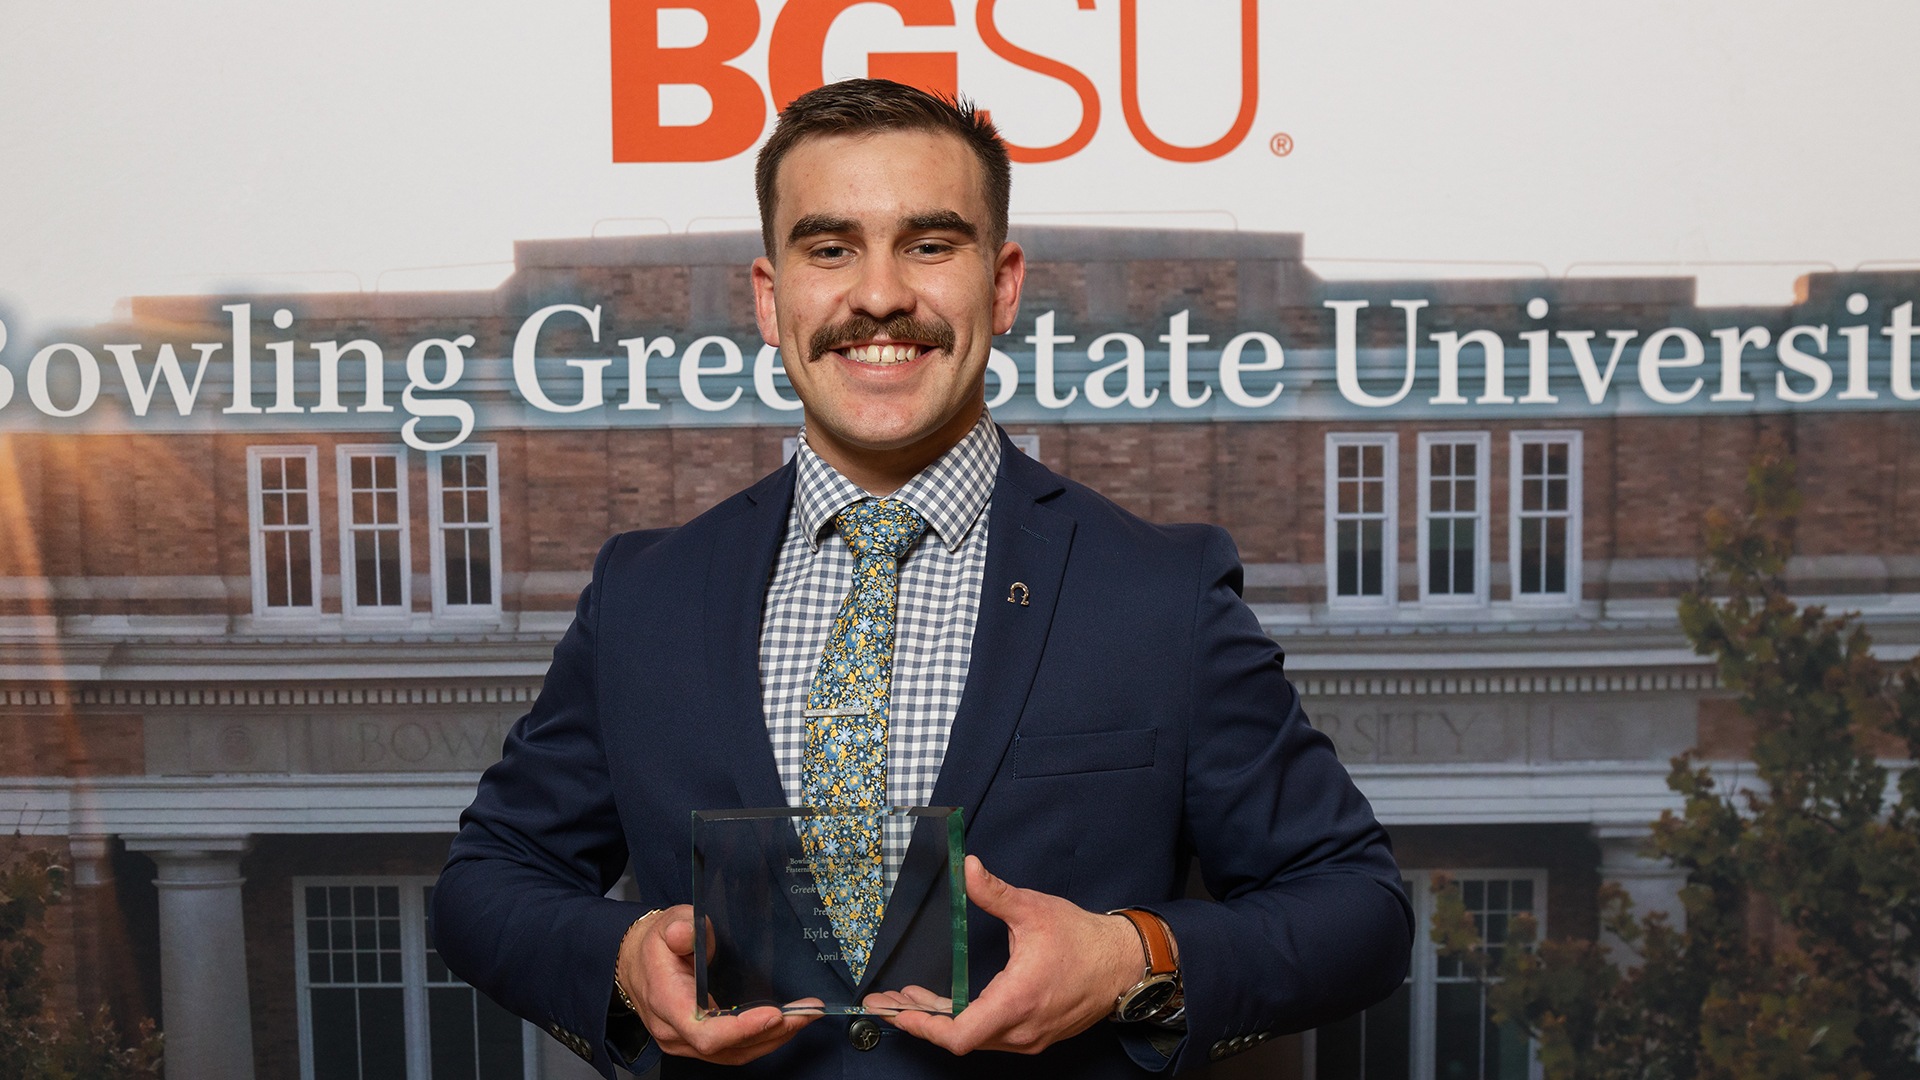 Kyle Calvey holds a glass trophy in front of a BGSU mural.